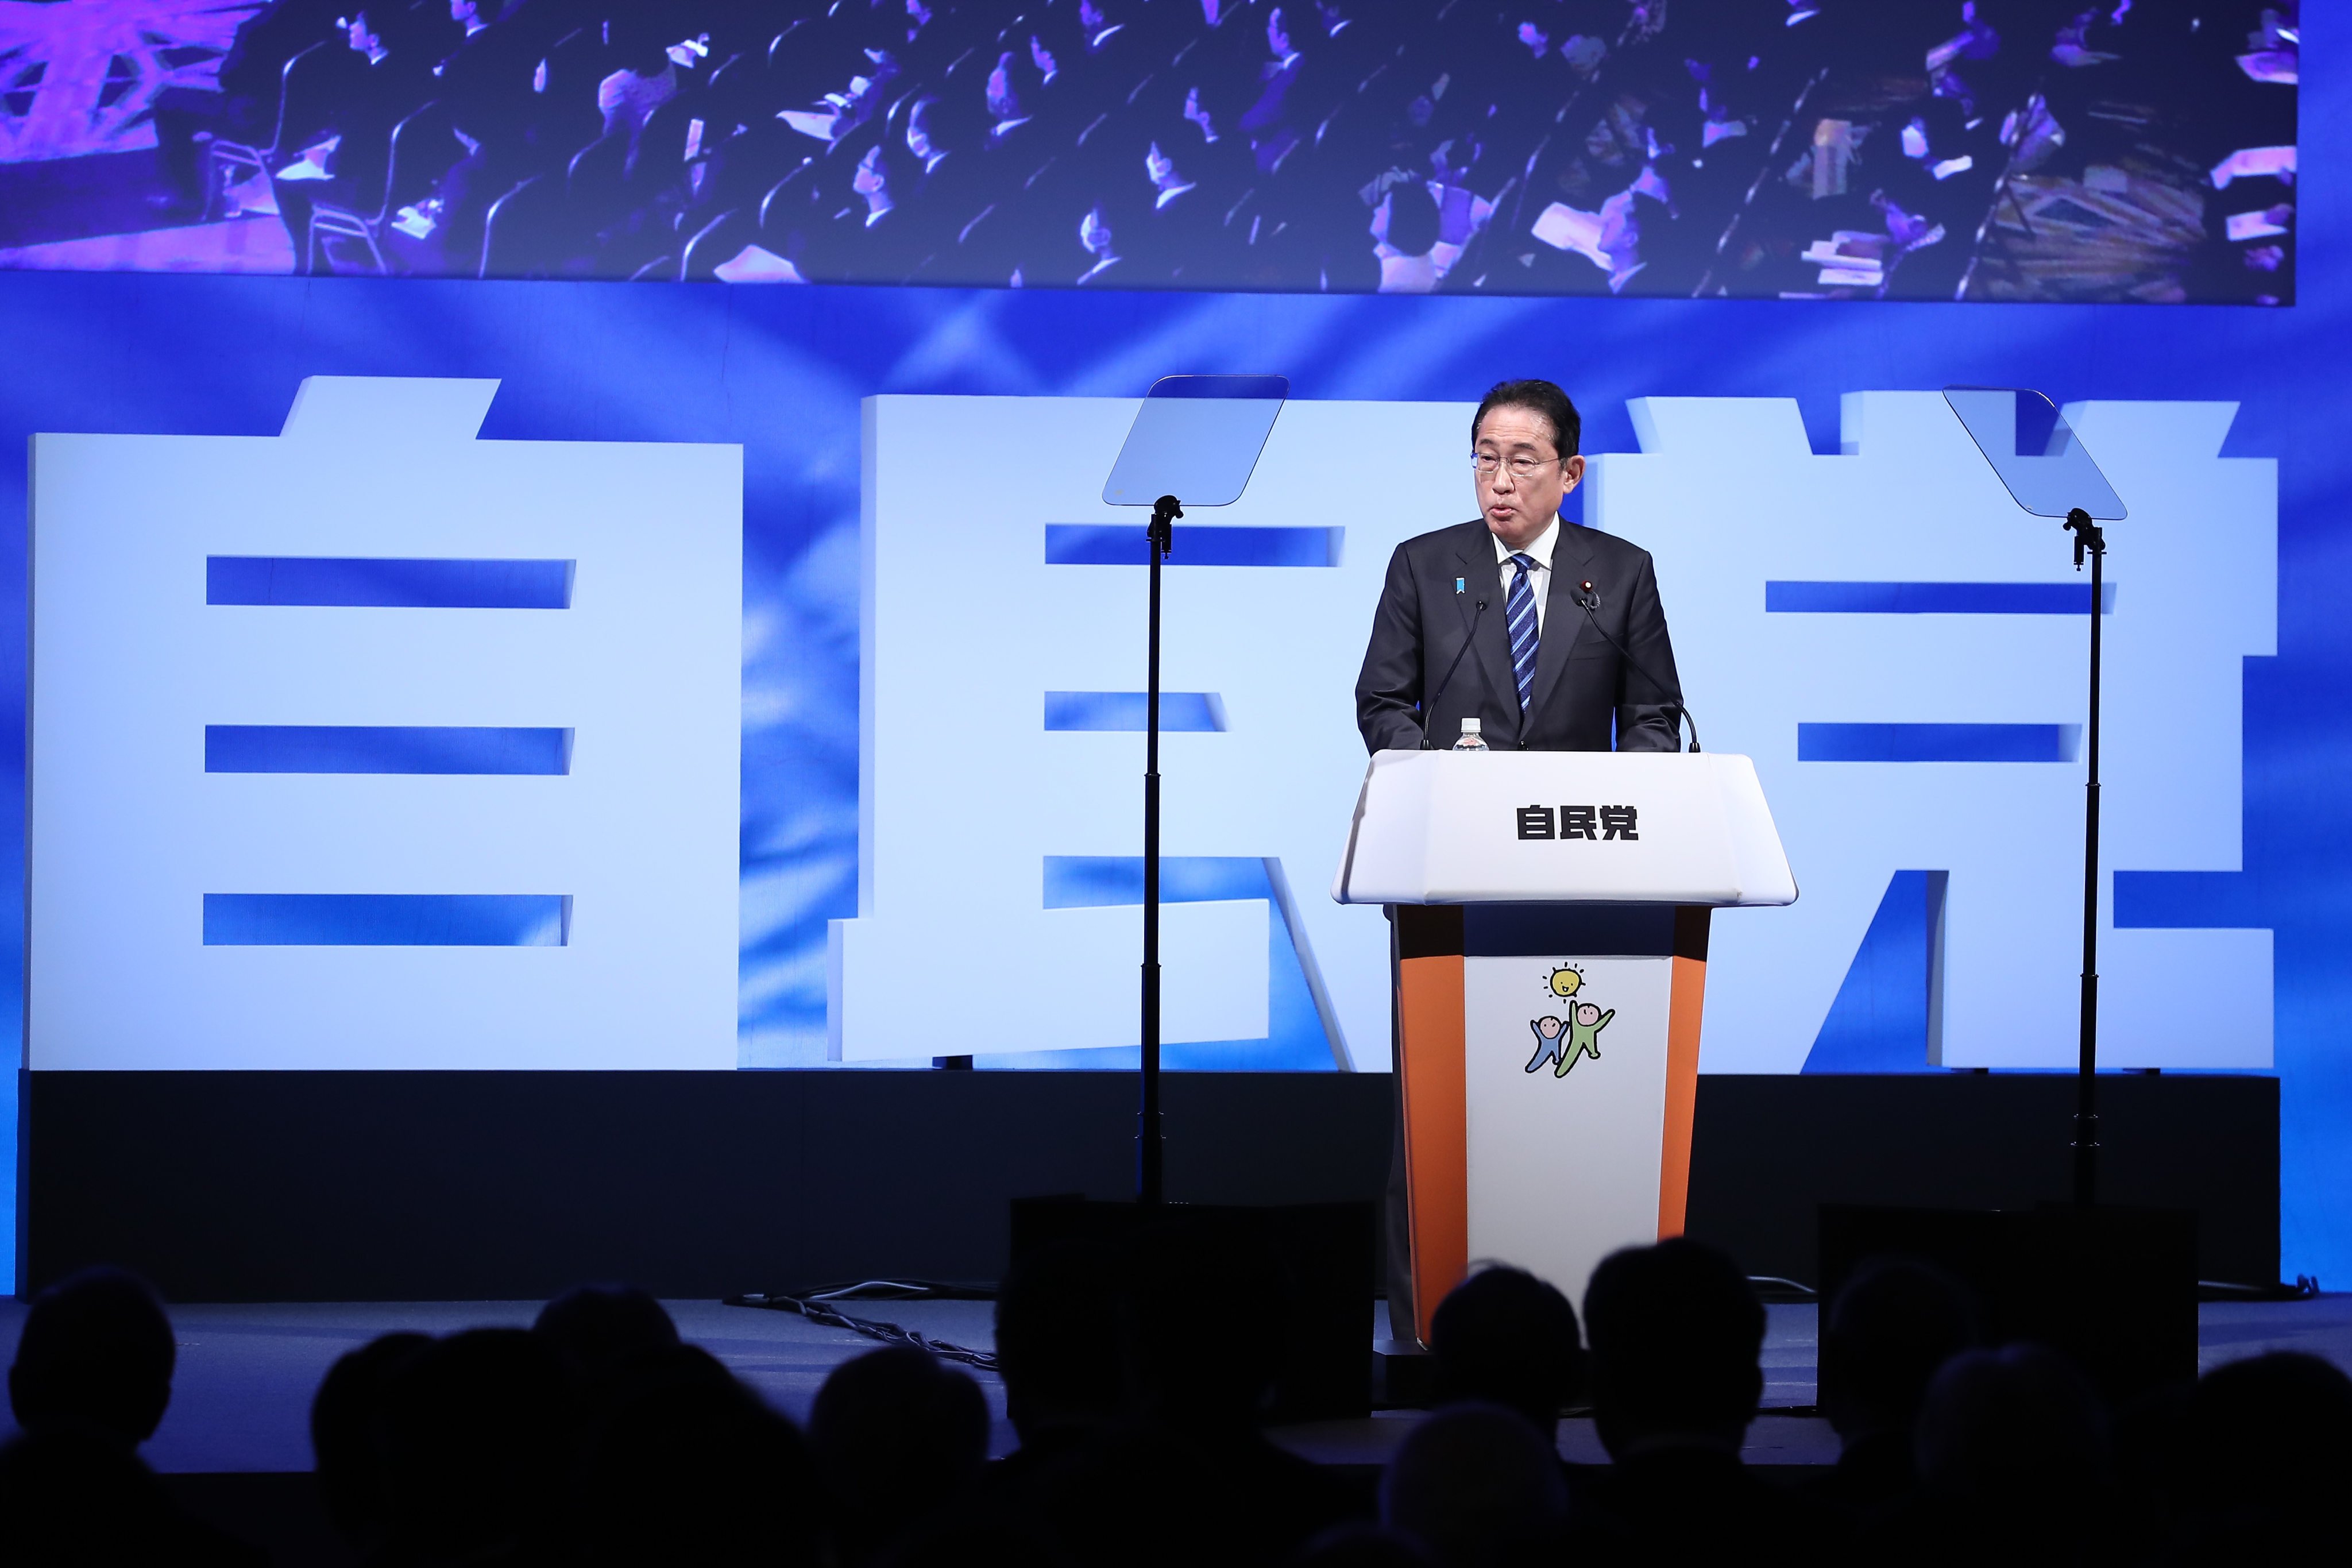 Fumio Kishida, Prime Minister of Japan and President of the Liberal Democratic Party, delivers a speech during the 91st party convention in Tokyo. Kishida hopes the steps will allow the party to move on from the scandal before his visit to the US next week. Photo: dpa